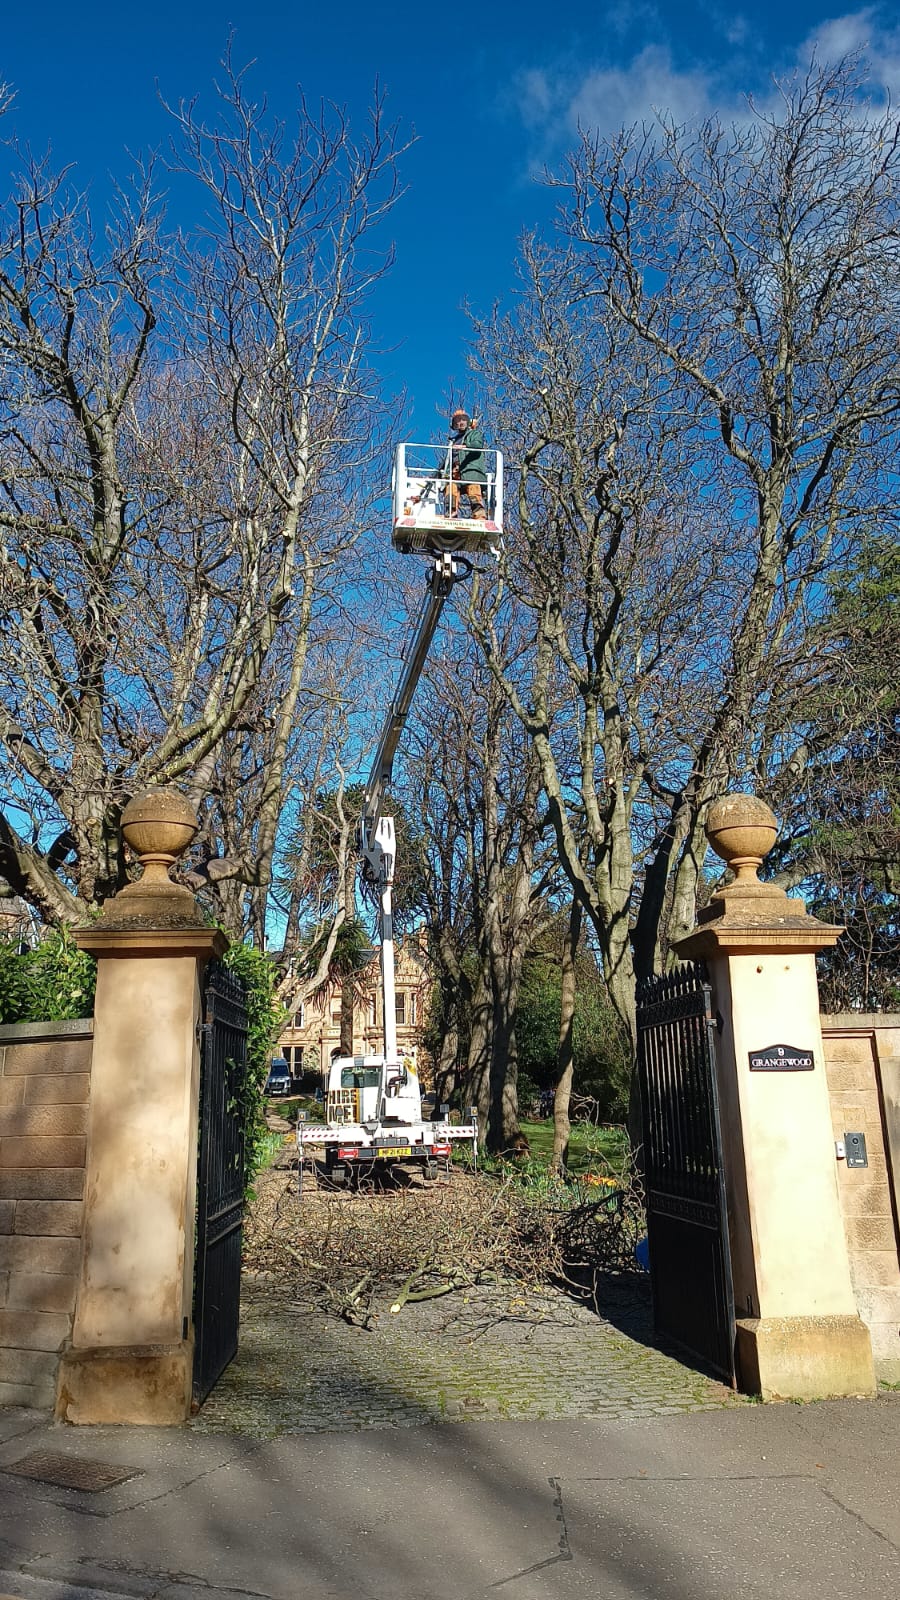 Do you need a tree surgeon in Edinburgh or Midlothian, click here for an Edinburgh Tree Surgeon quote from JDS Trees Ltd